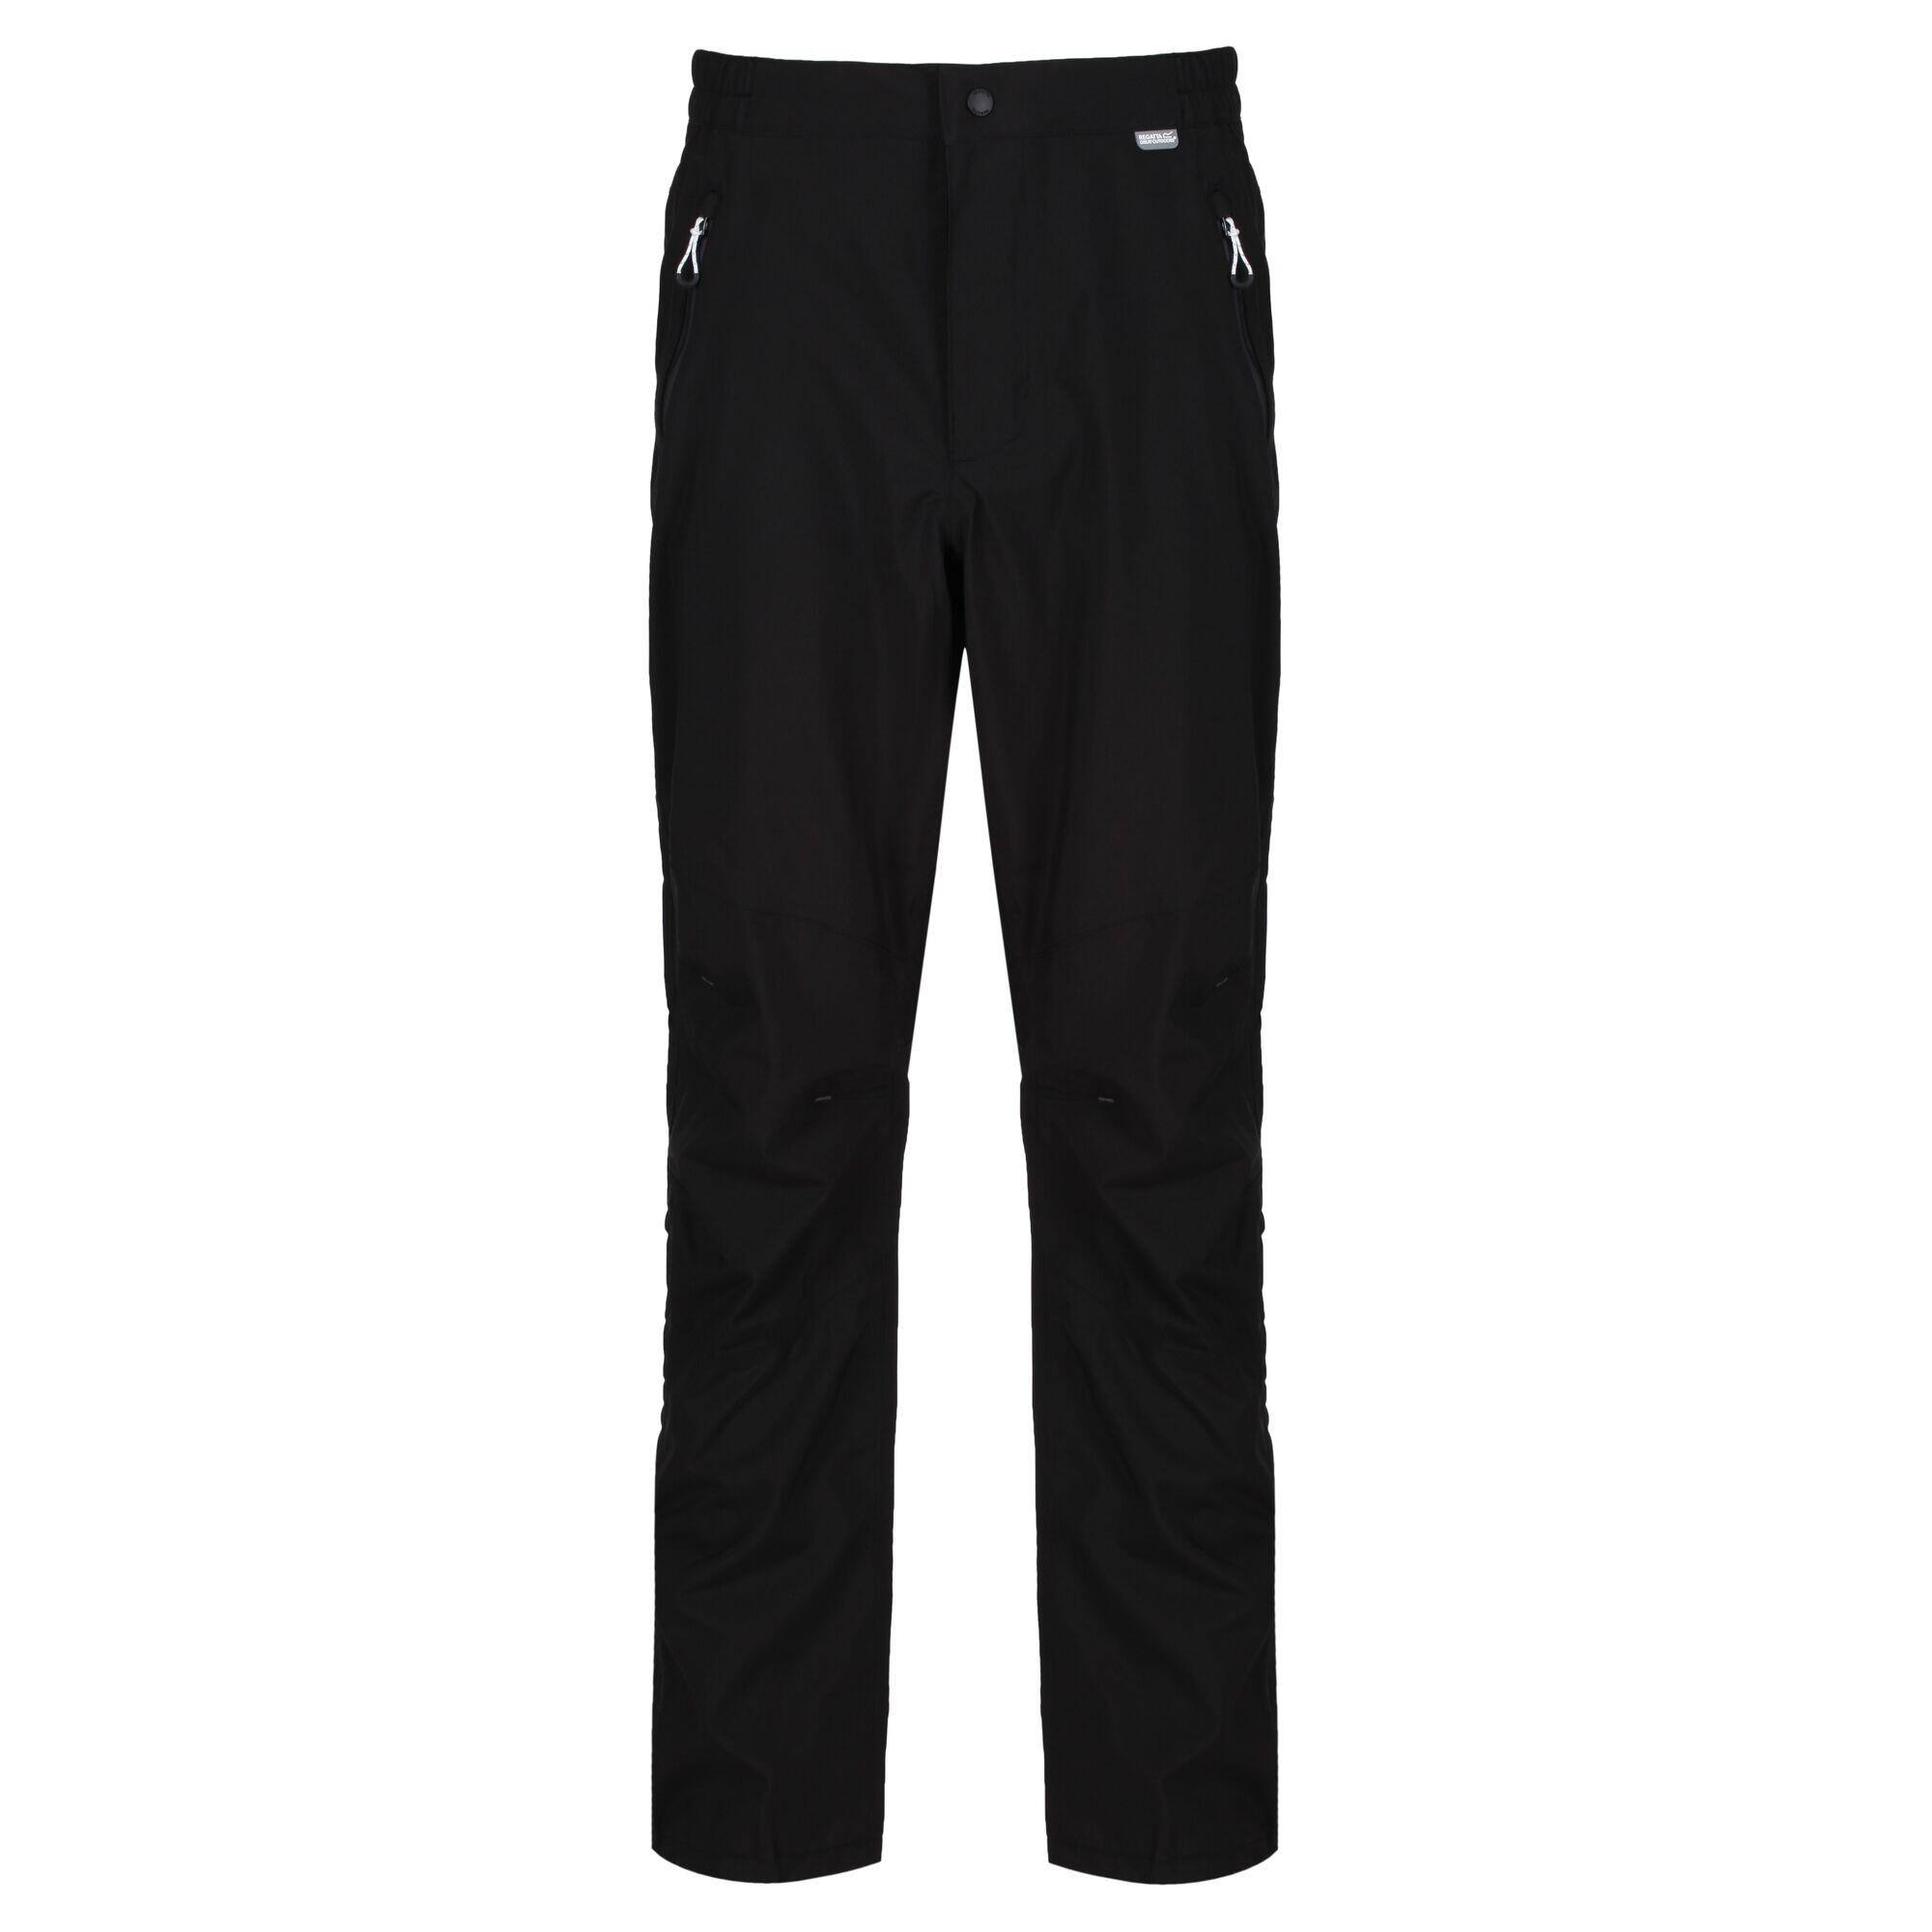 Highton Stretch Men's Hiking Overtrousers - Black 5/6